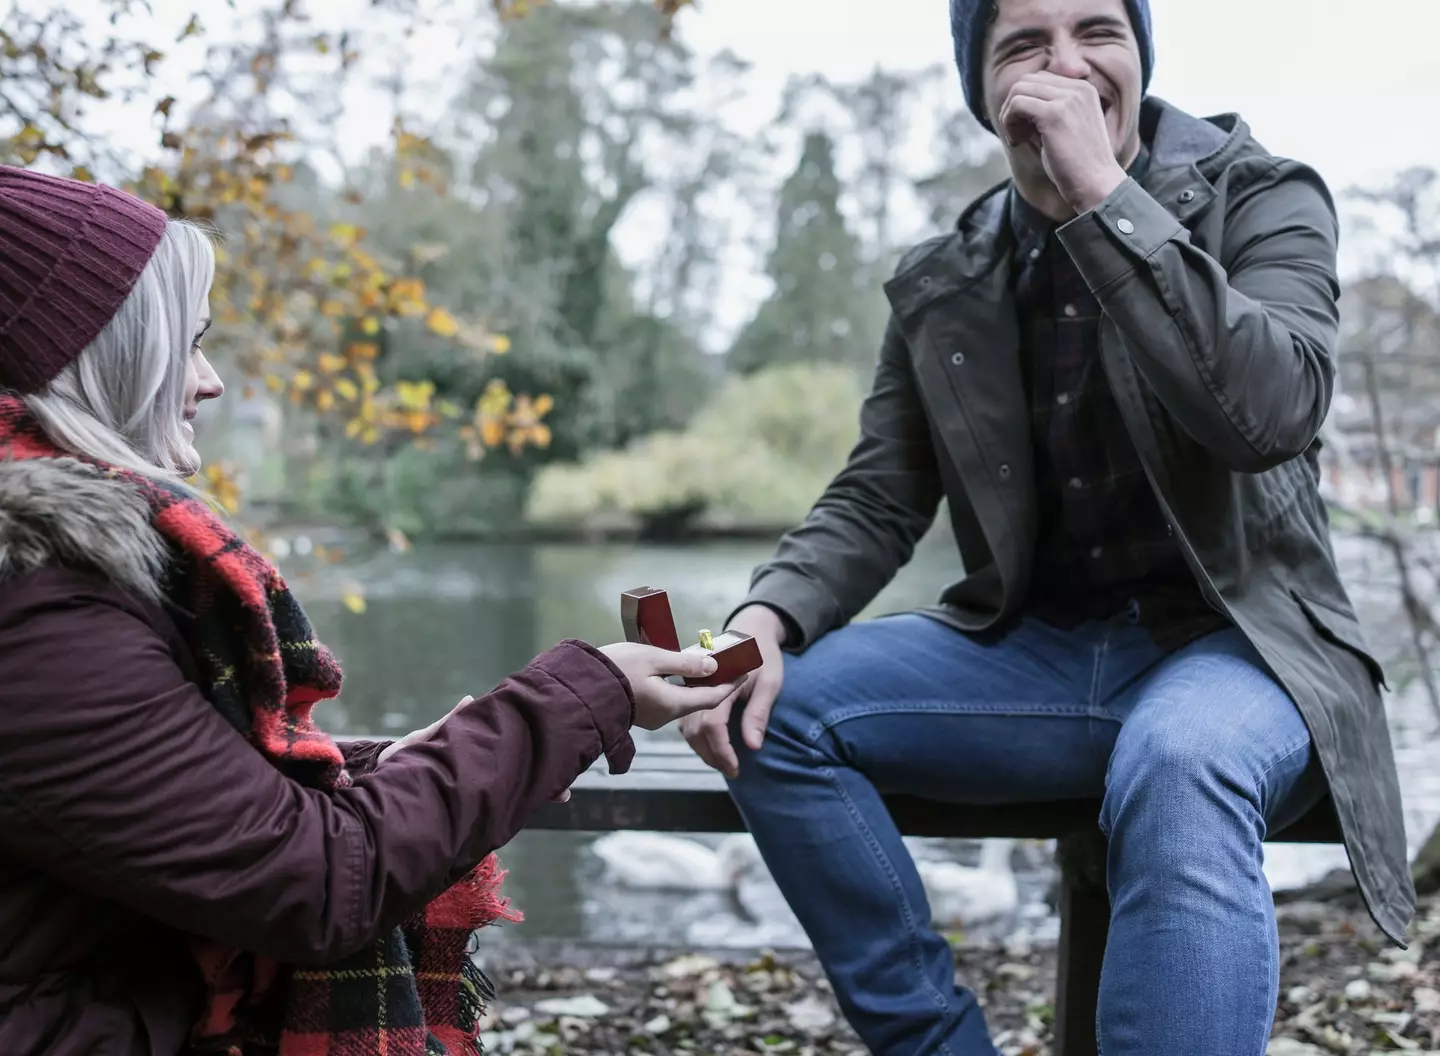 In Ireland, there's an old tradition that woman can propose to men on February 29.